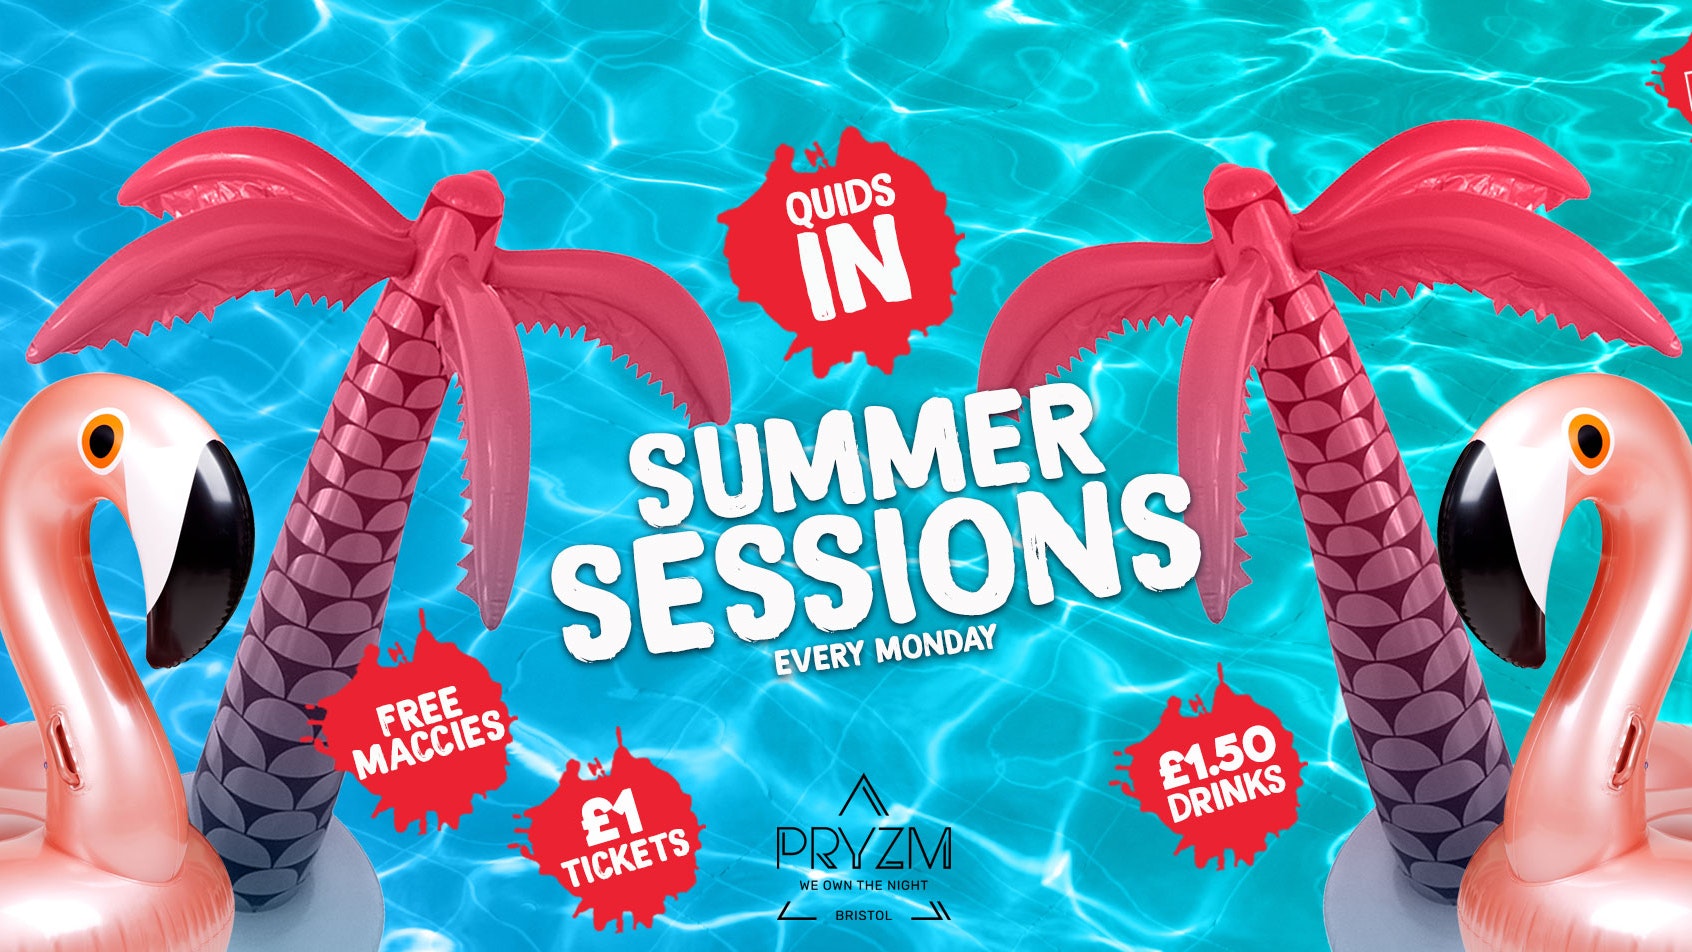 QUIDS IN / Summer Sessions –  £1 Tickets